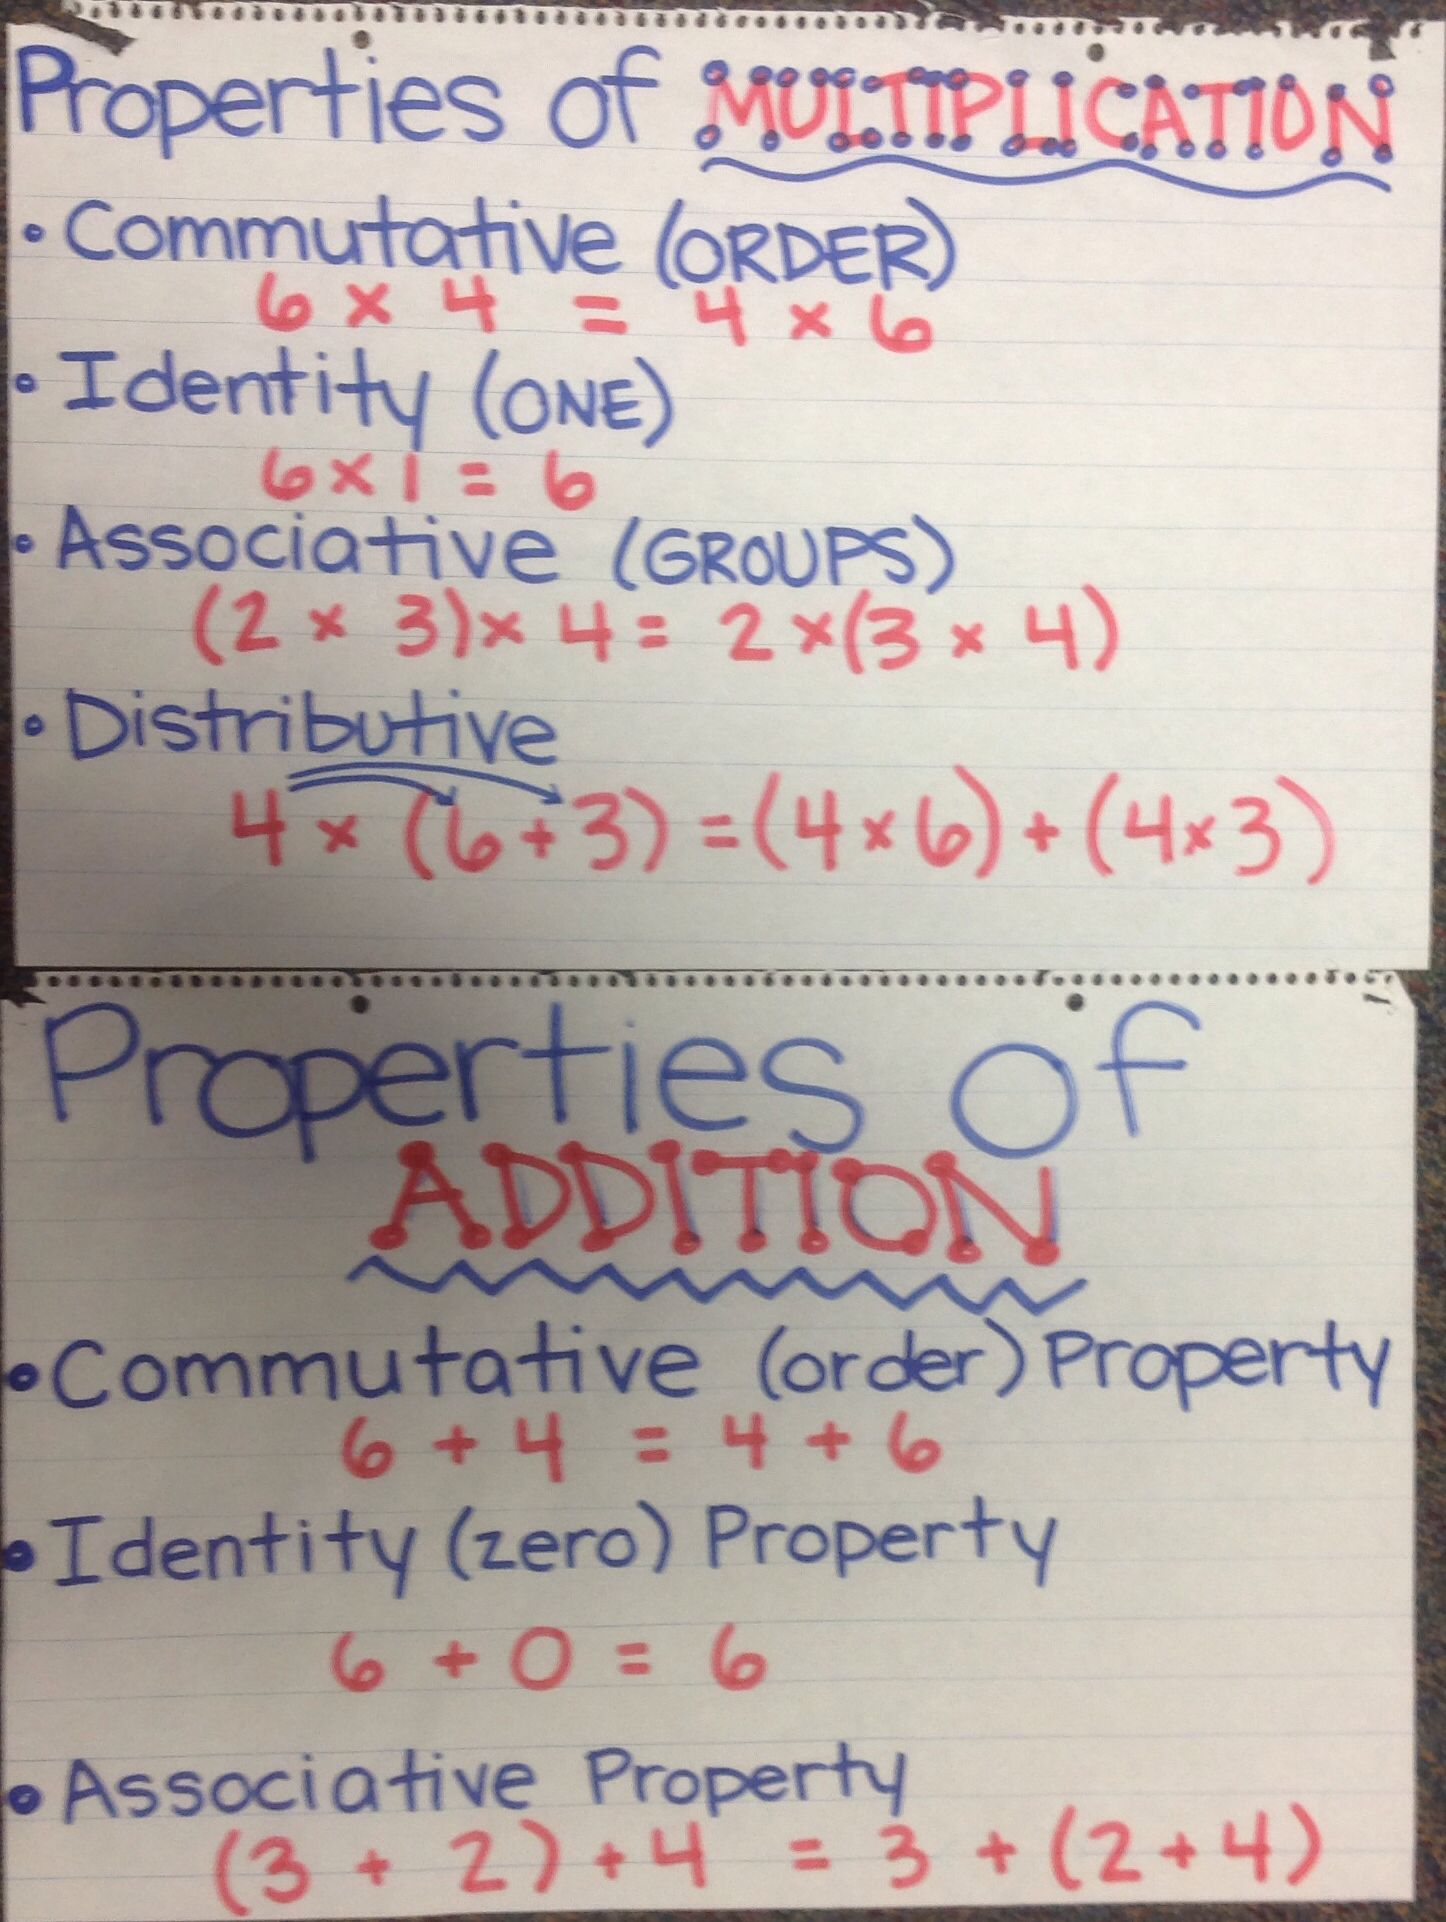 Properties Of Multiplication And Addition - Mrs. Ashley&amp;#039;s